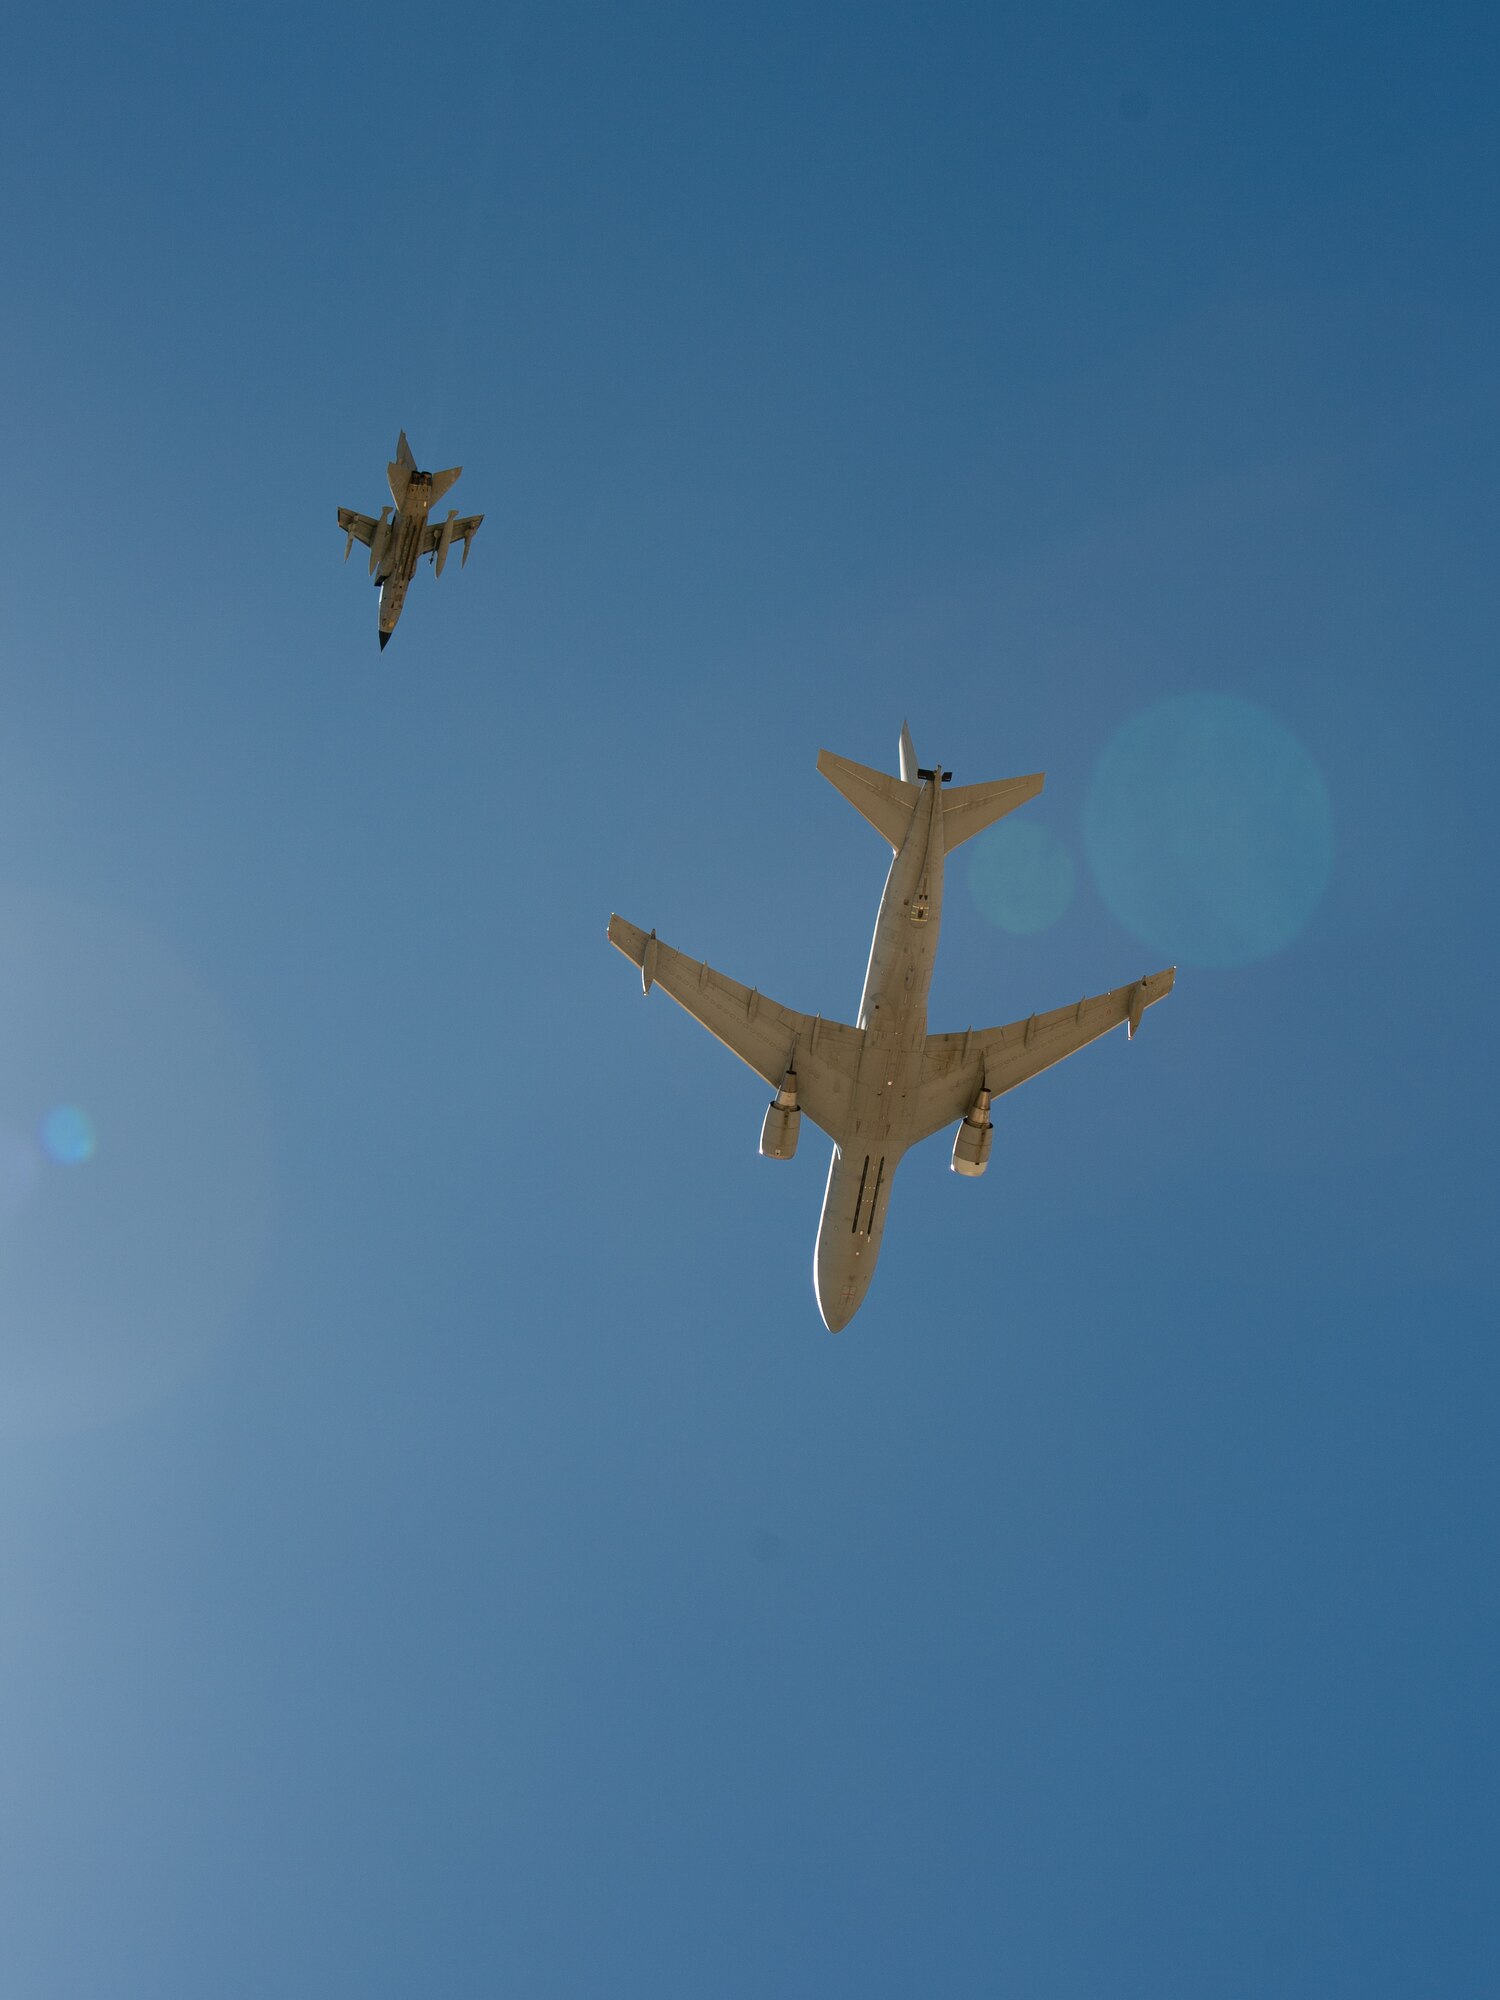 An Italian Air Force PA-200 Tornado and KC-767 flies over Edwards Air Force Base, California, May 9. Members of the Italian Air Force partnered with their Edwards AFB counterparts to conduct test sorties to gather data on weapon pairing. (Air Force photo by Josh McClanahan)